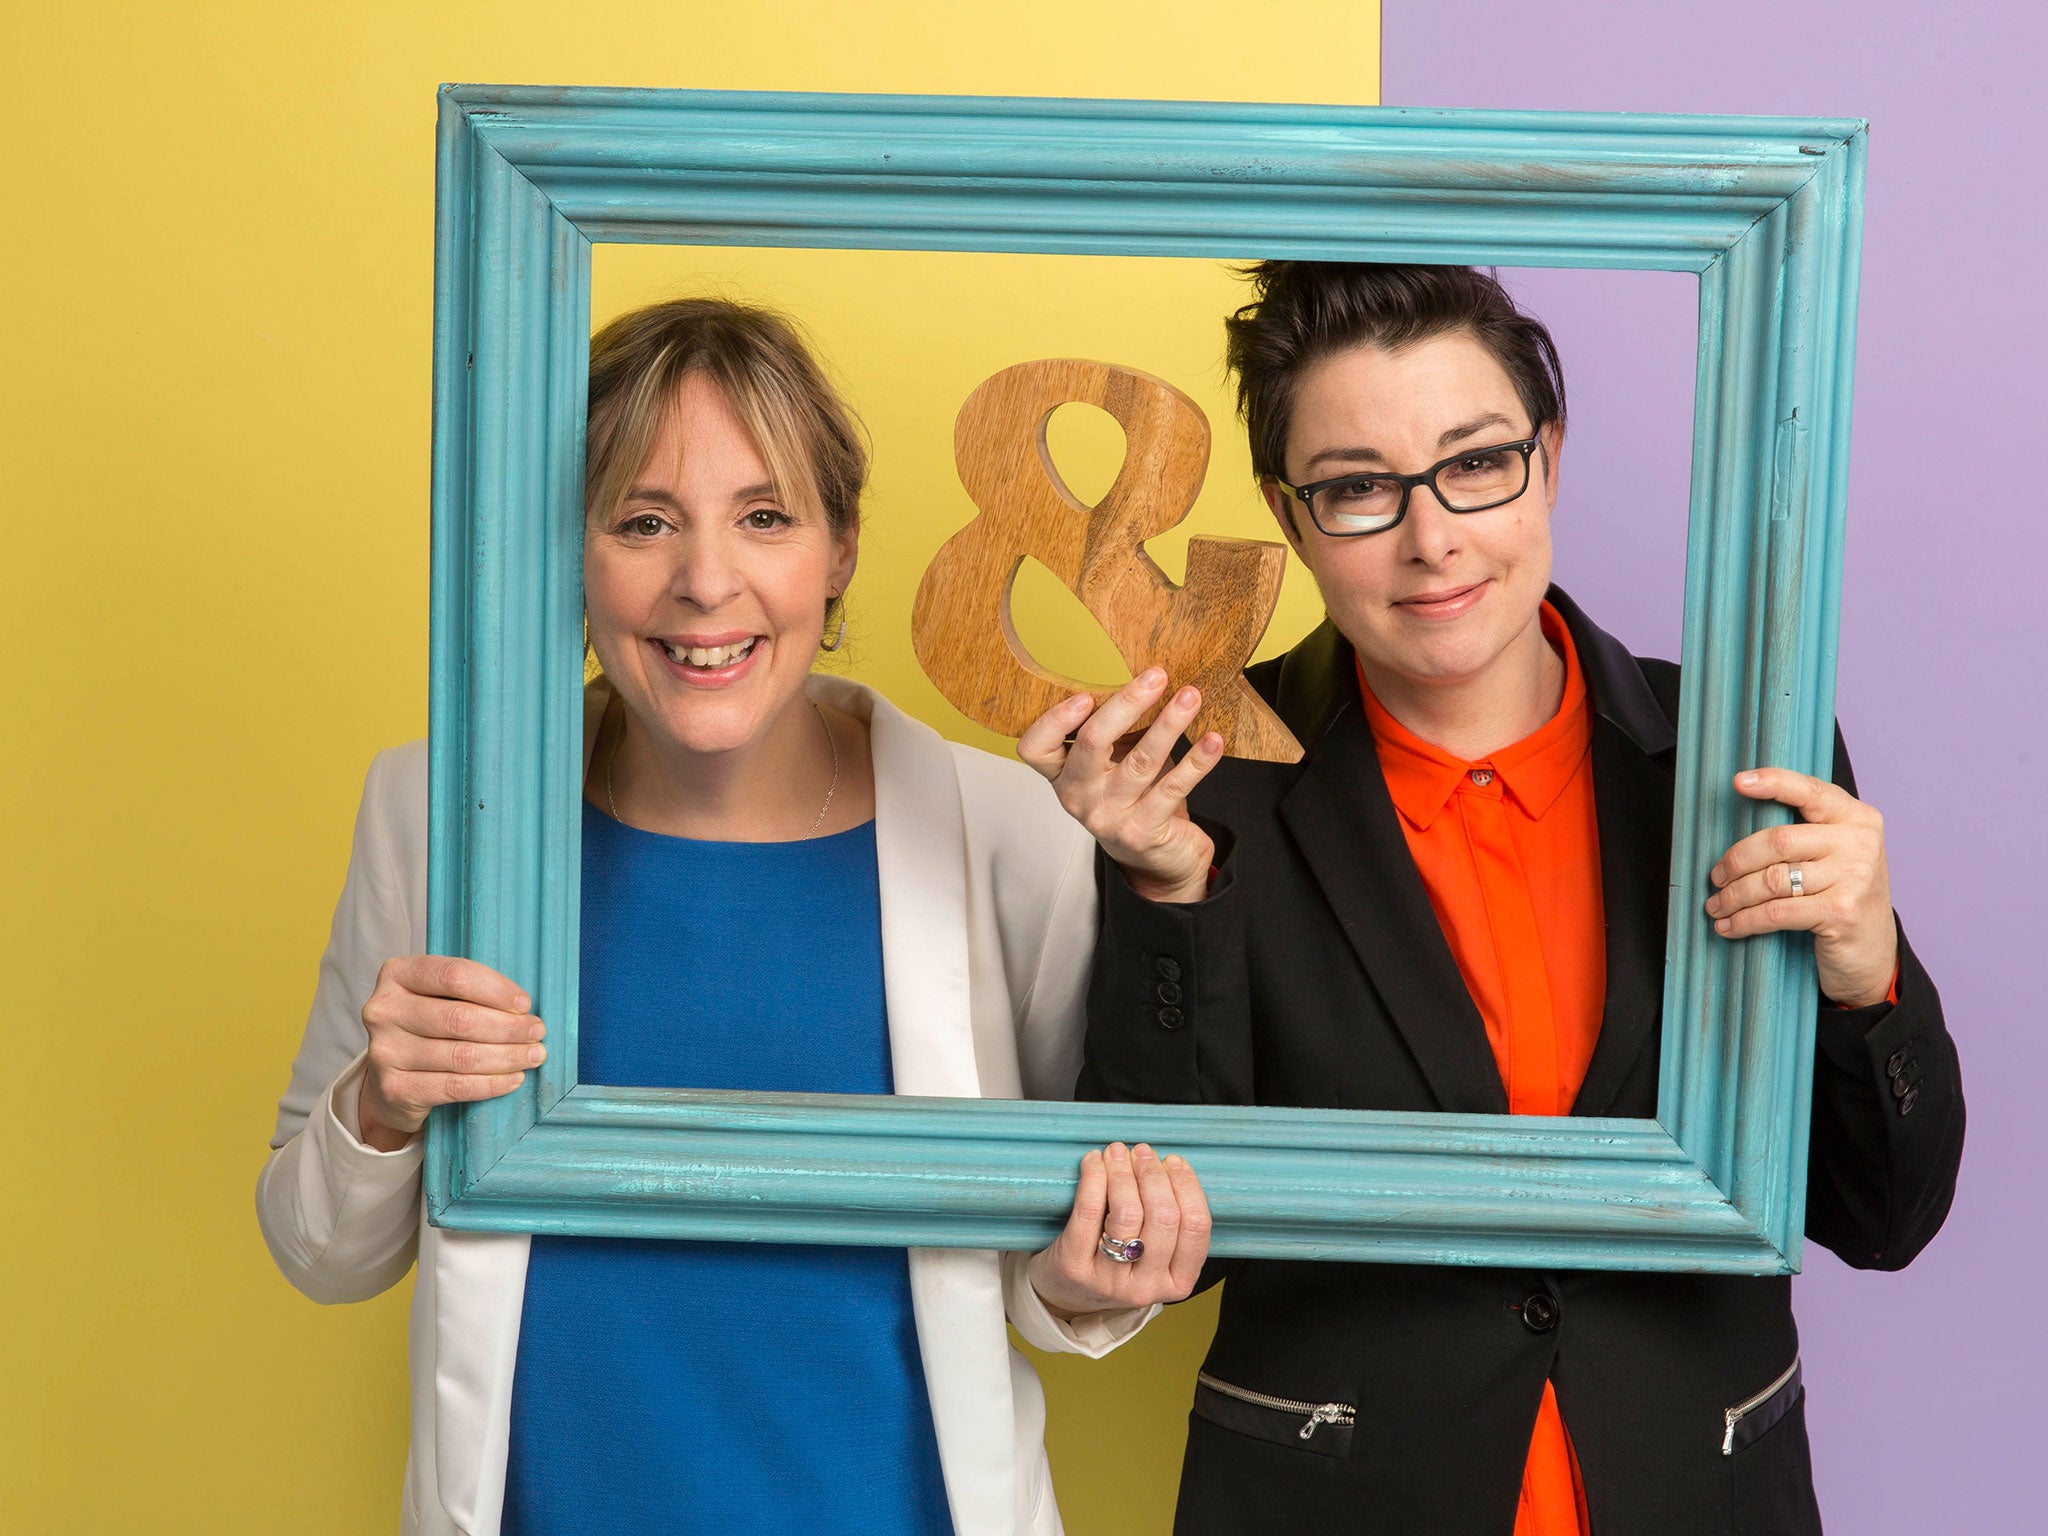 Mel Giedroyc and Sue Perkins' chat show begins in January